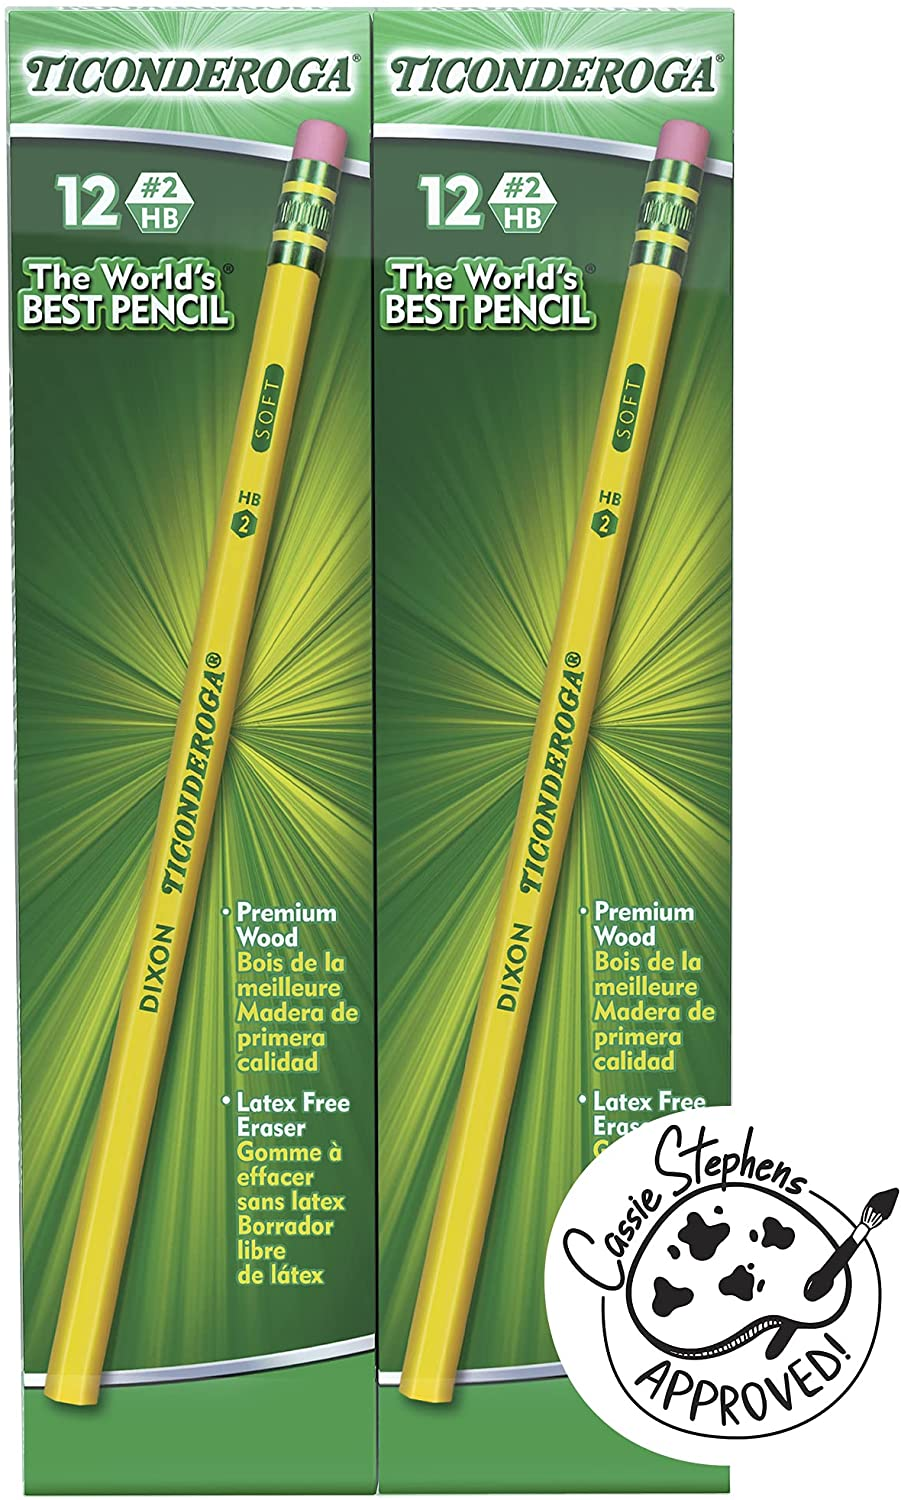 TICONDEROGA Pencils, Wood-Cased, Unsharpened, Graphite #2 HB Soft, Yellow, 96-Pack (13872) : Wood Lead Pencils : Office Products $5.77